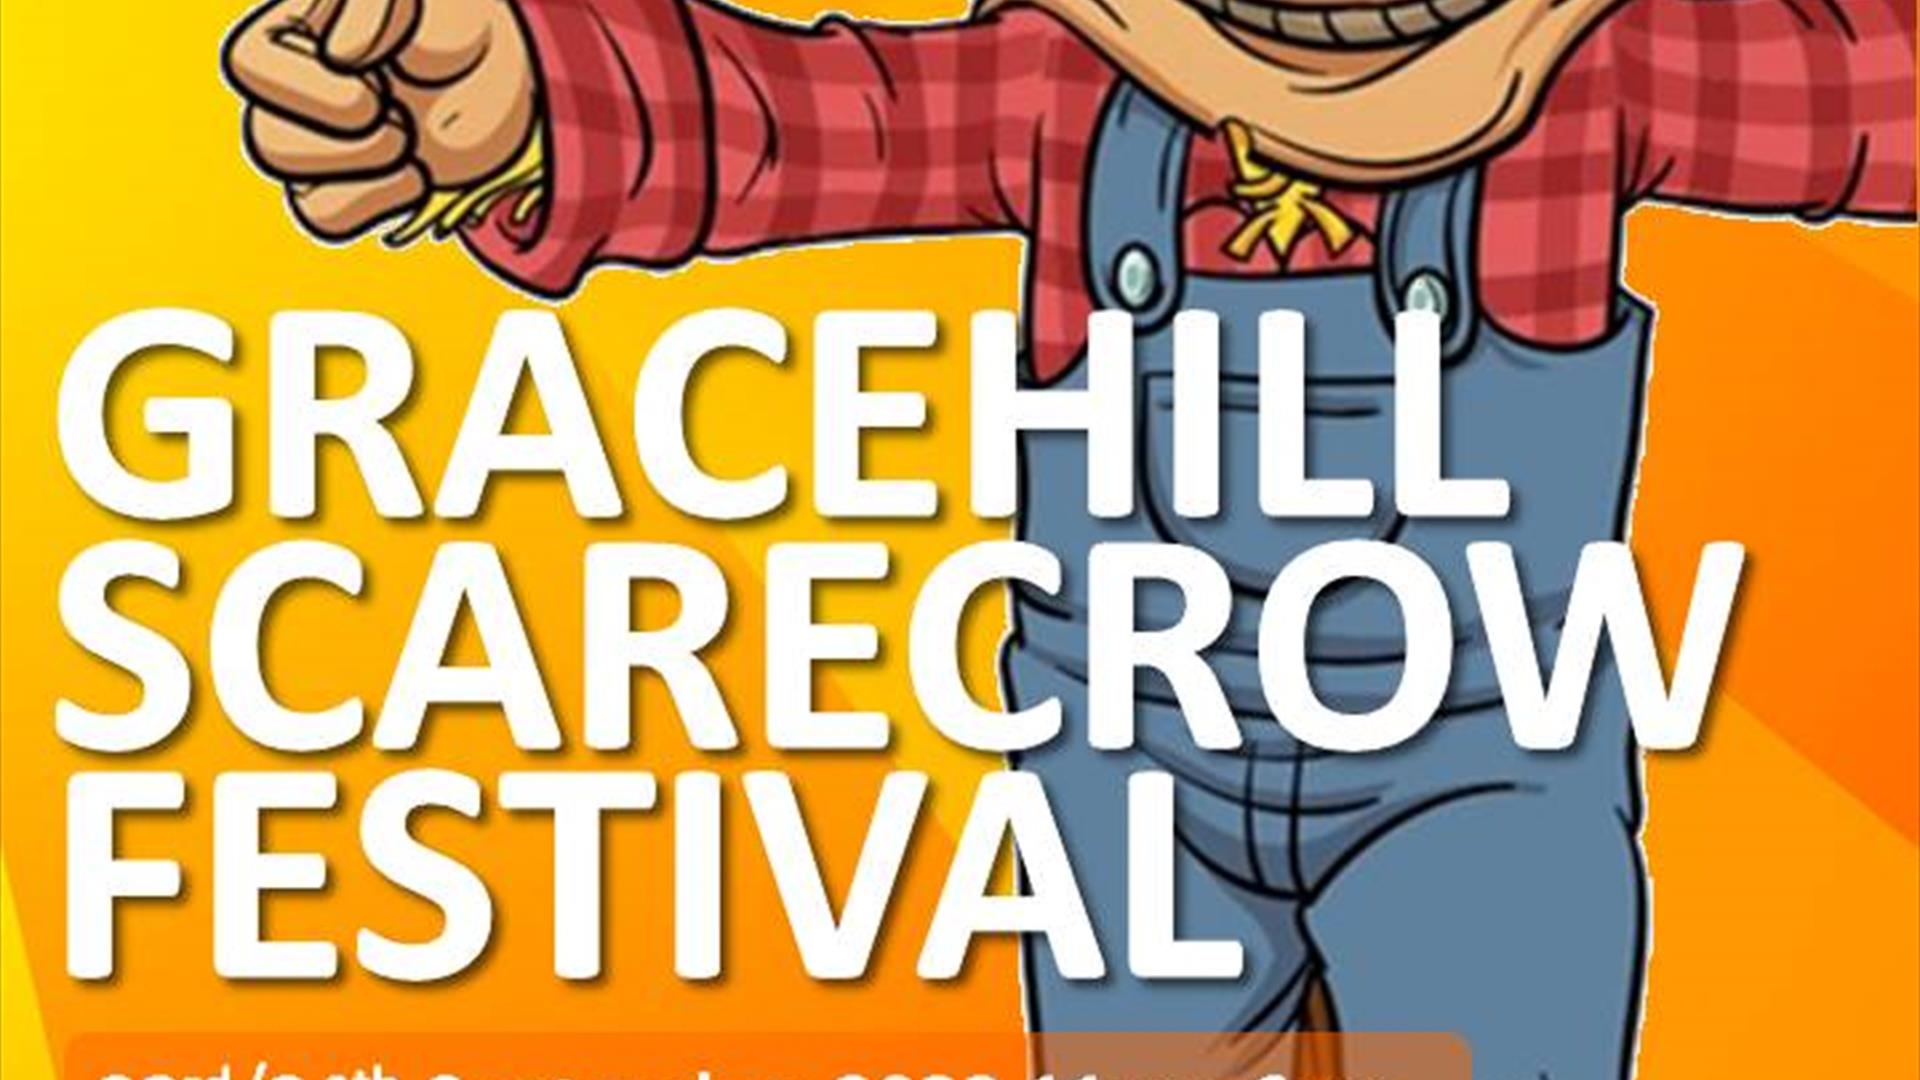 Gracehill Scarecrow Festival (front of flyer)